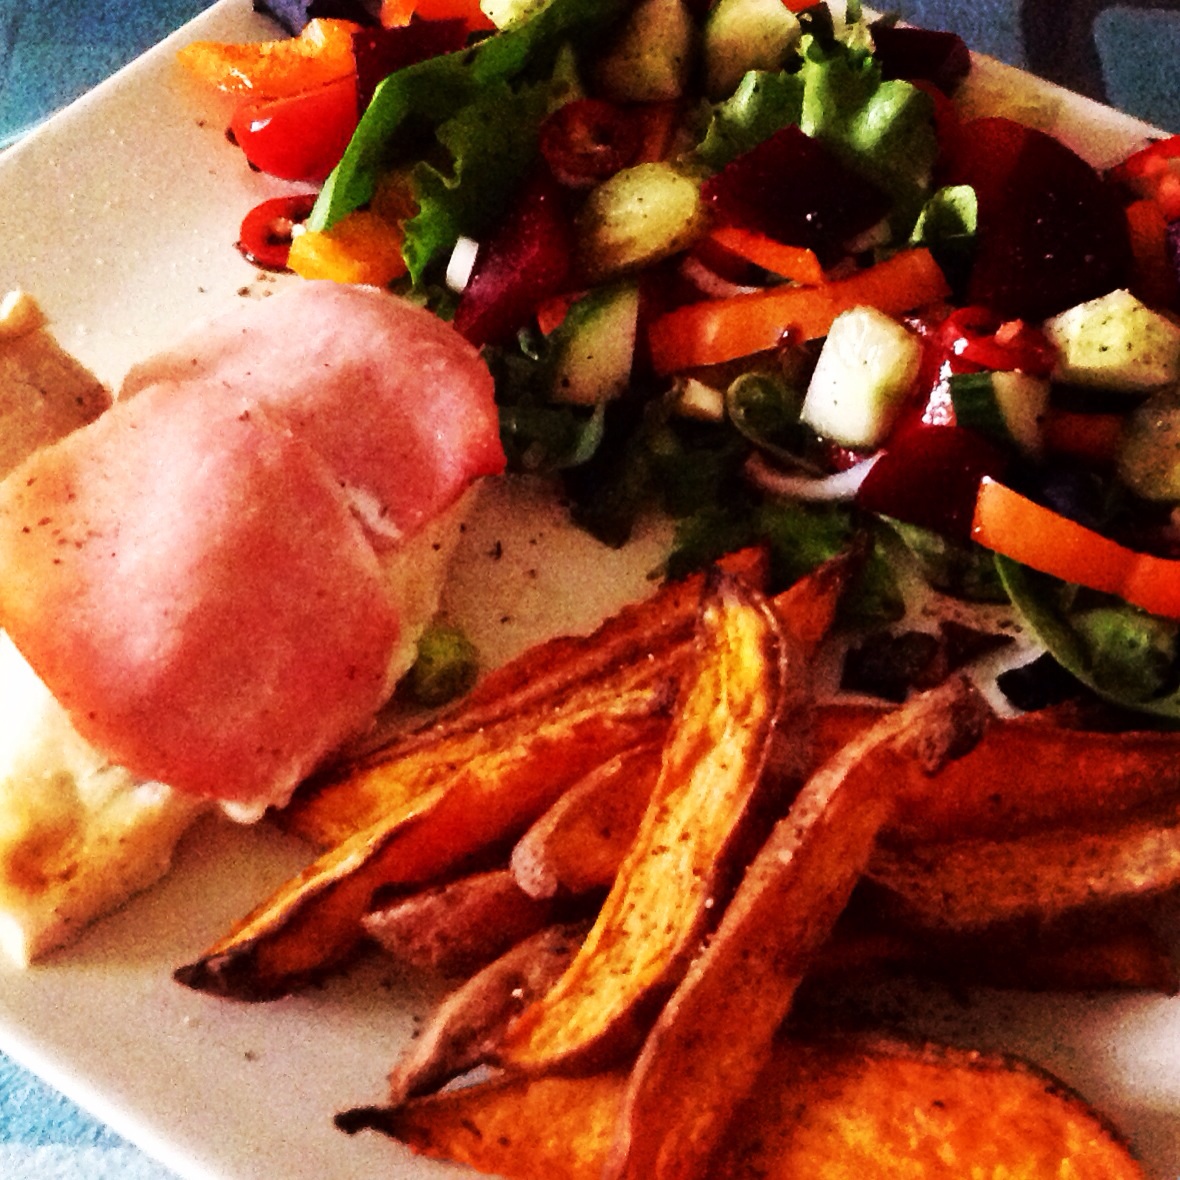 Chicken stuffed with quark and garlic wrapped in bacon, sweet potato chips and salad